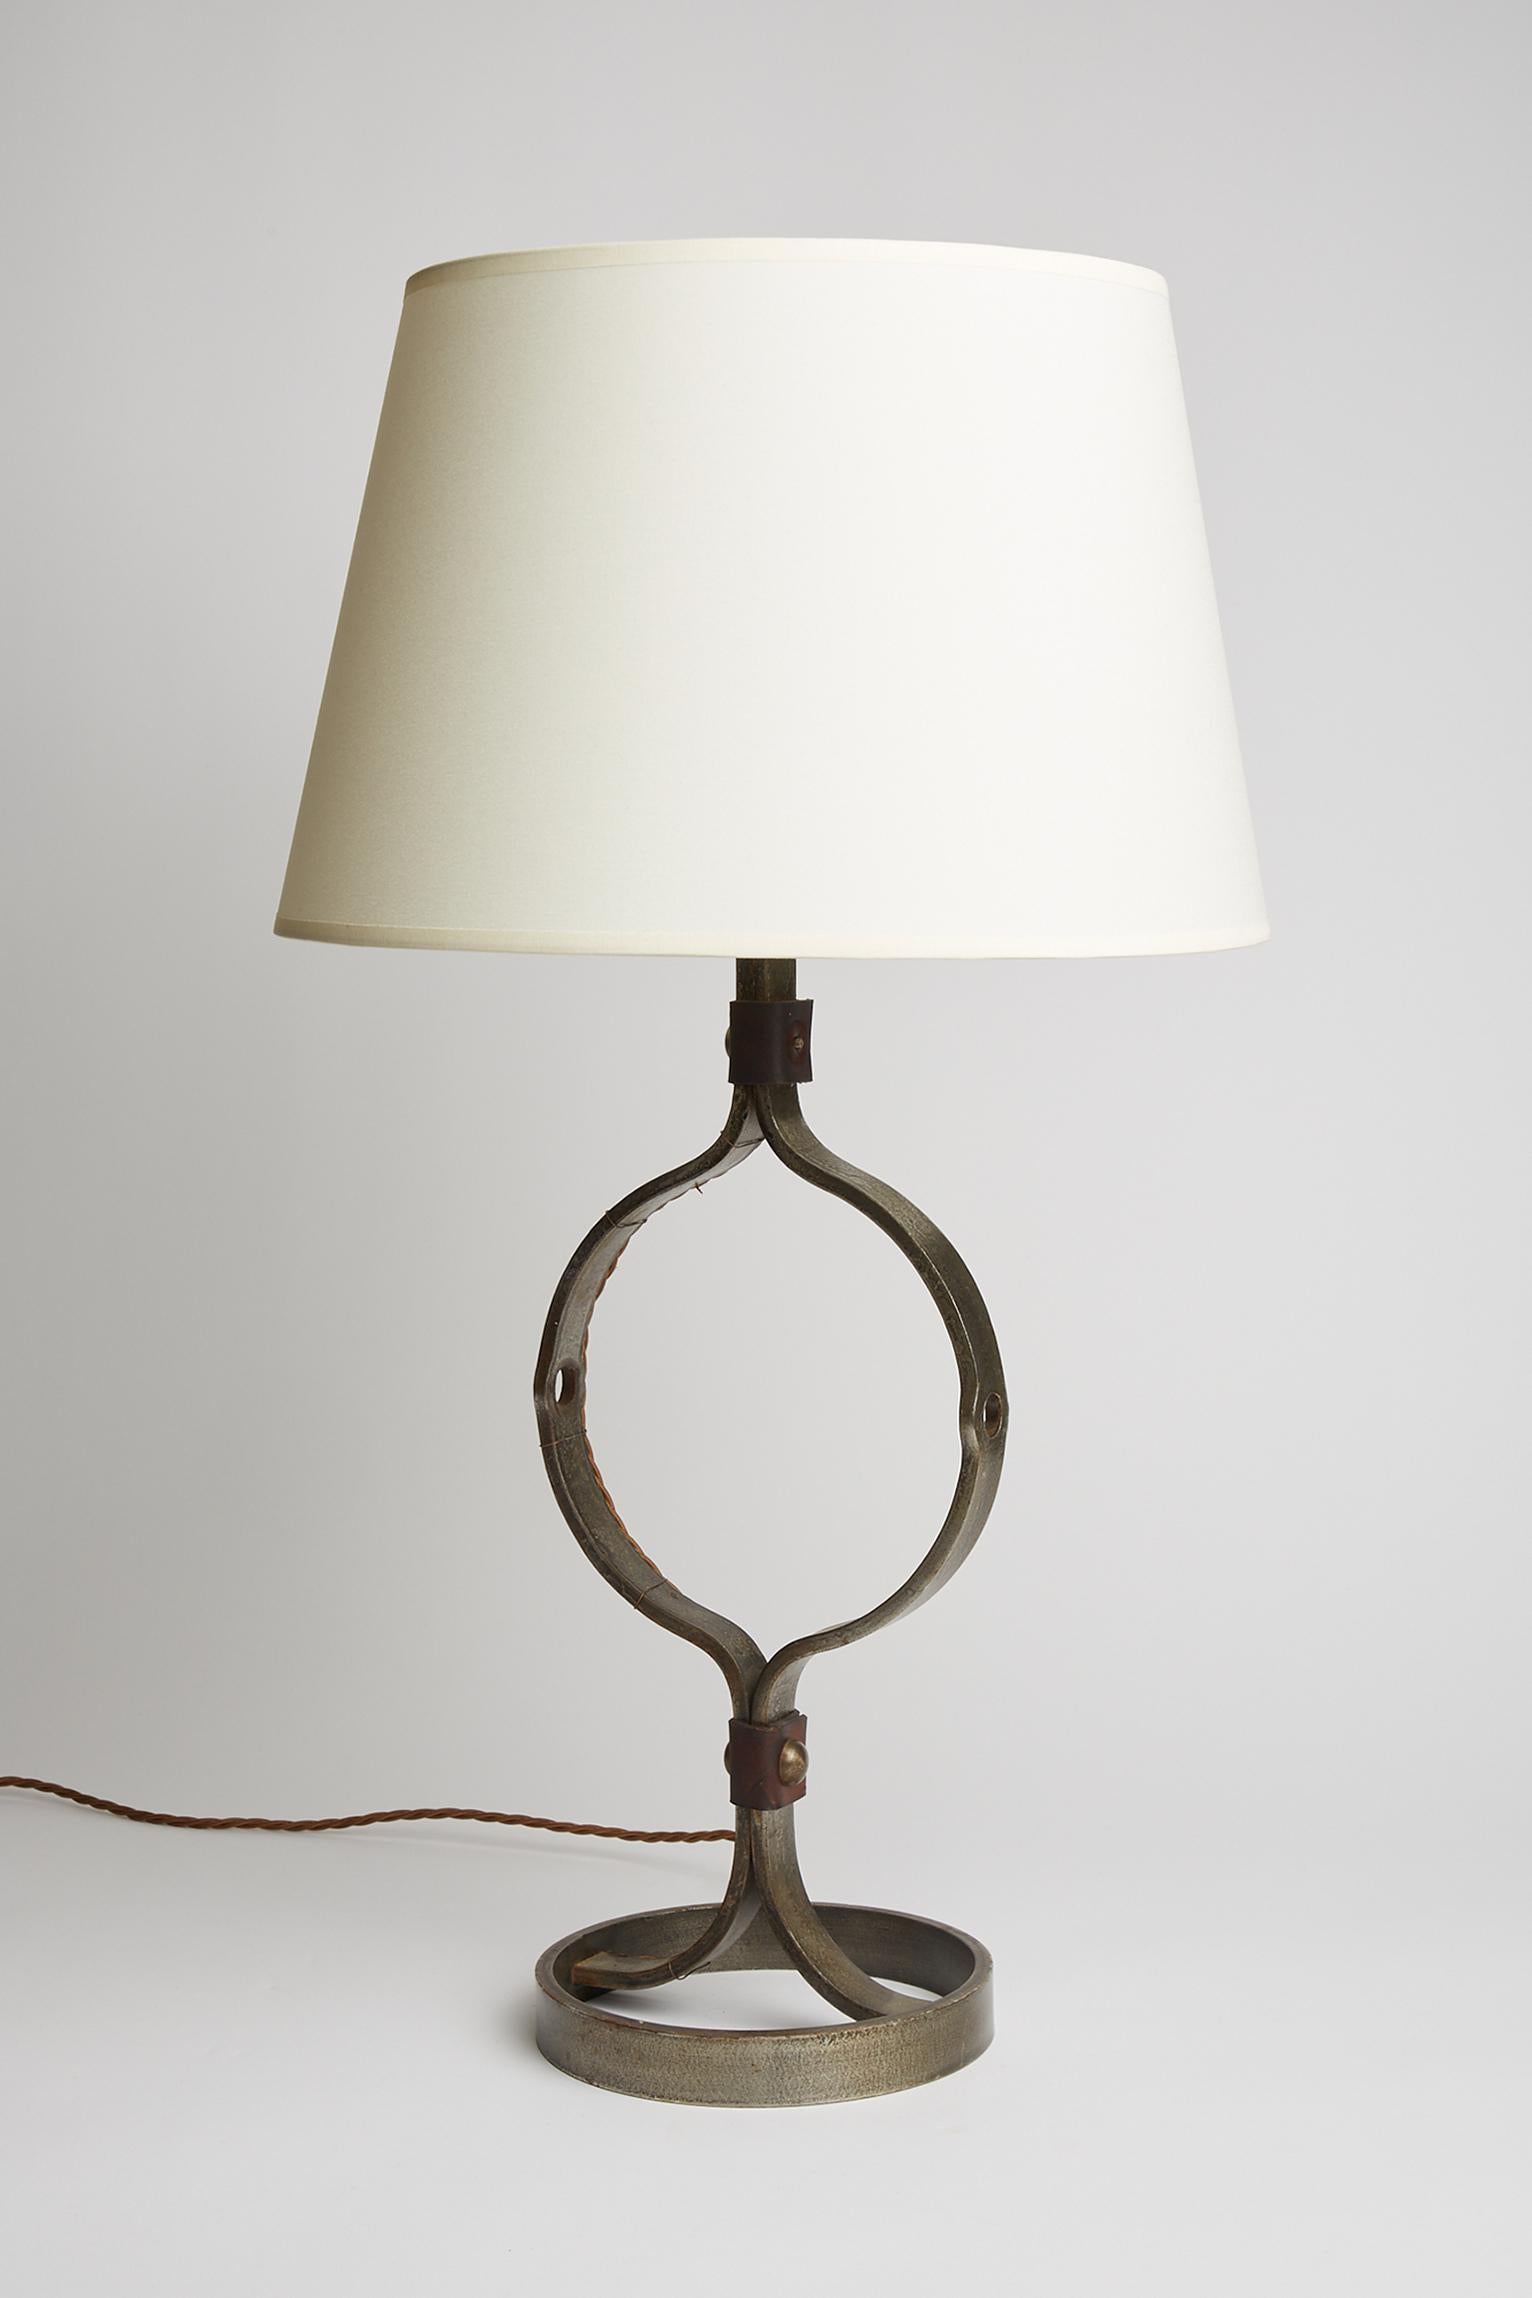 Mid-Century Modern Mid-Century Iron and Leather Table Lamp by Jean-Pierre Ryckaert For Sale